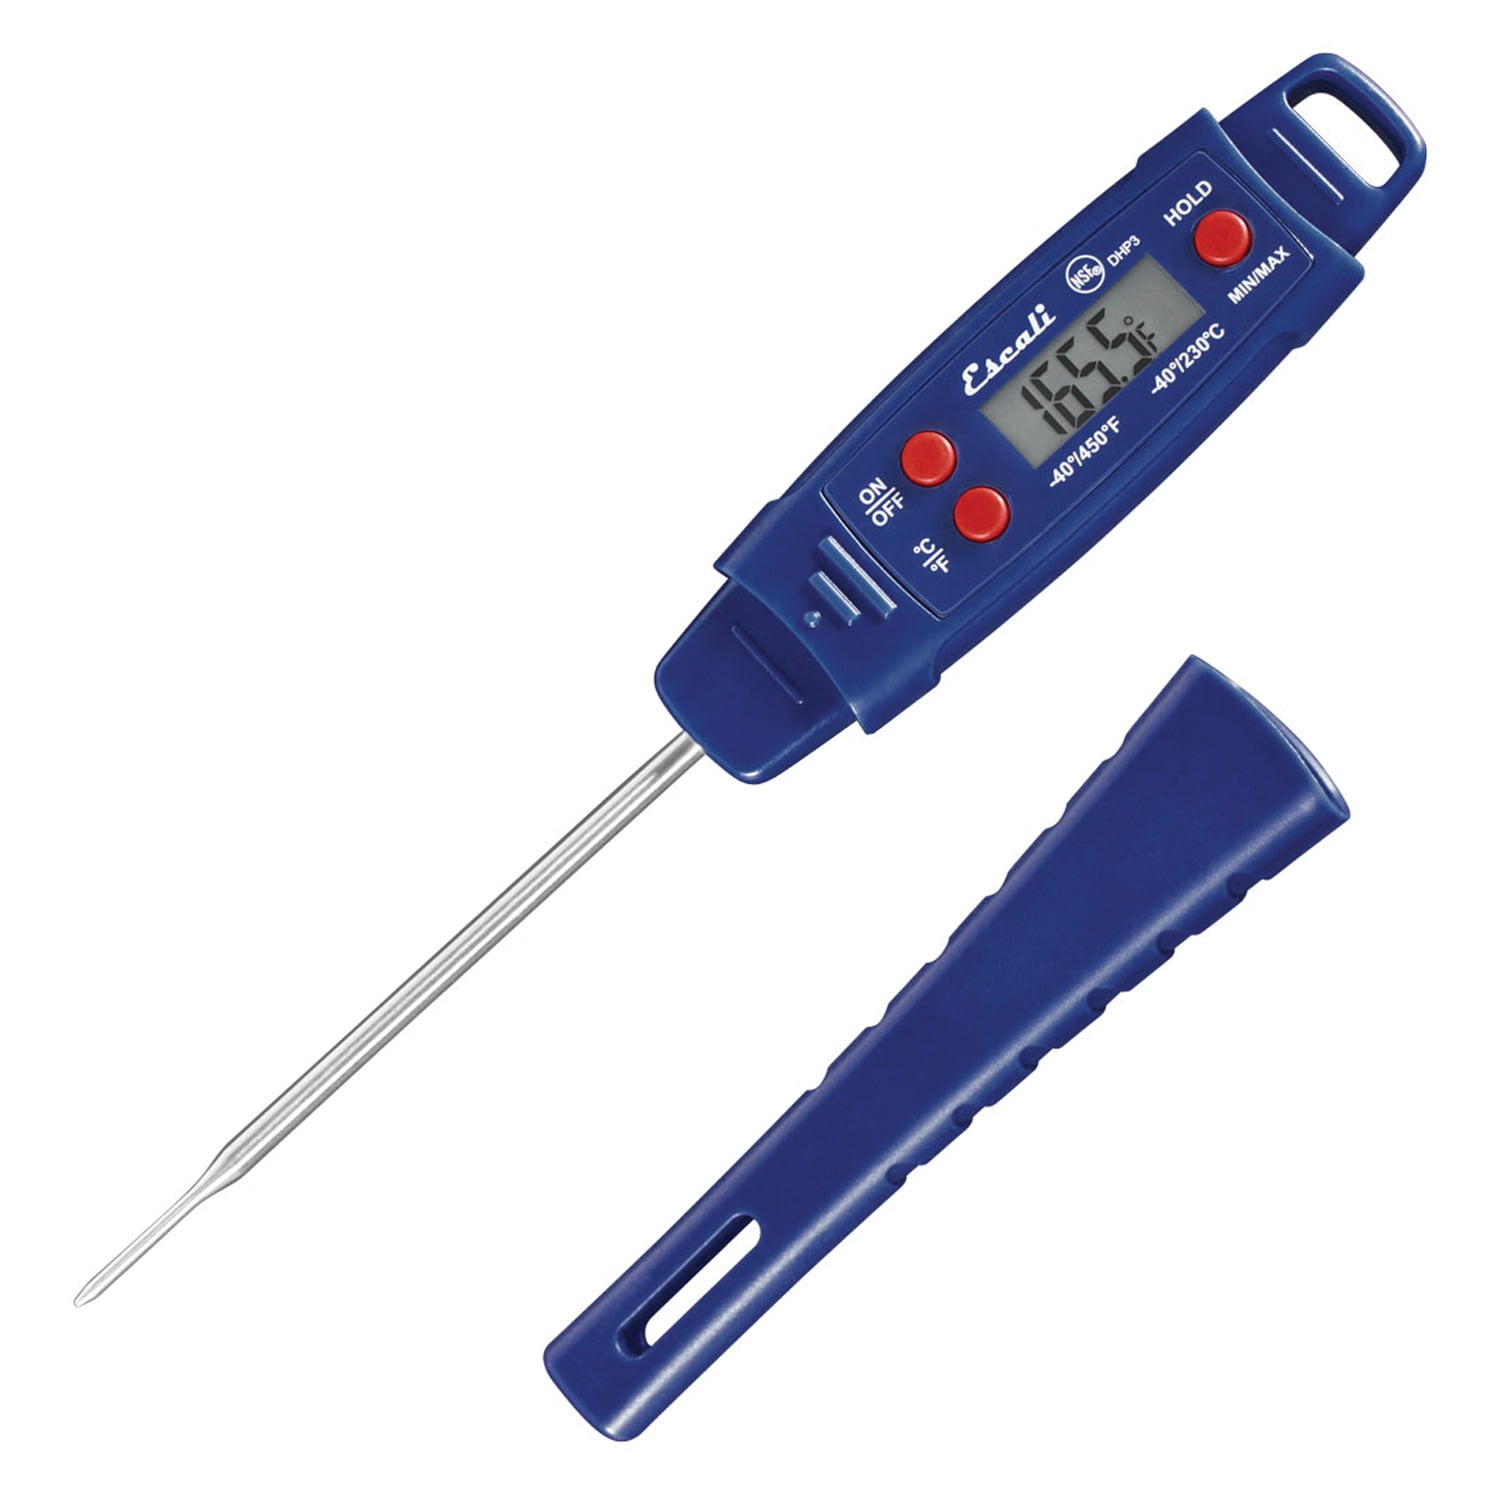 Cosmetic Discount* Range Dial smart cooking thermometer – Supermechanical